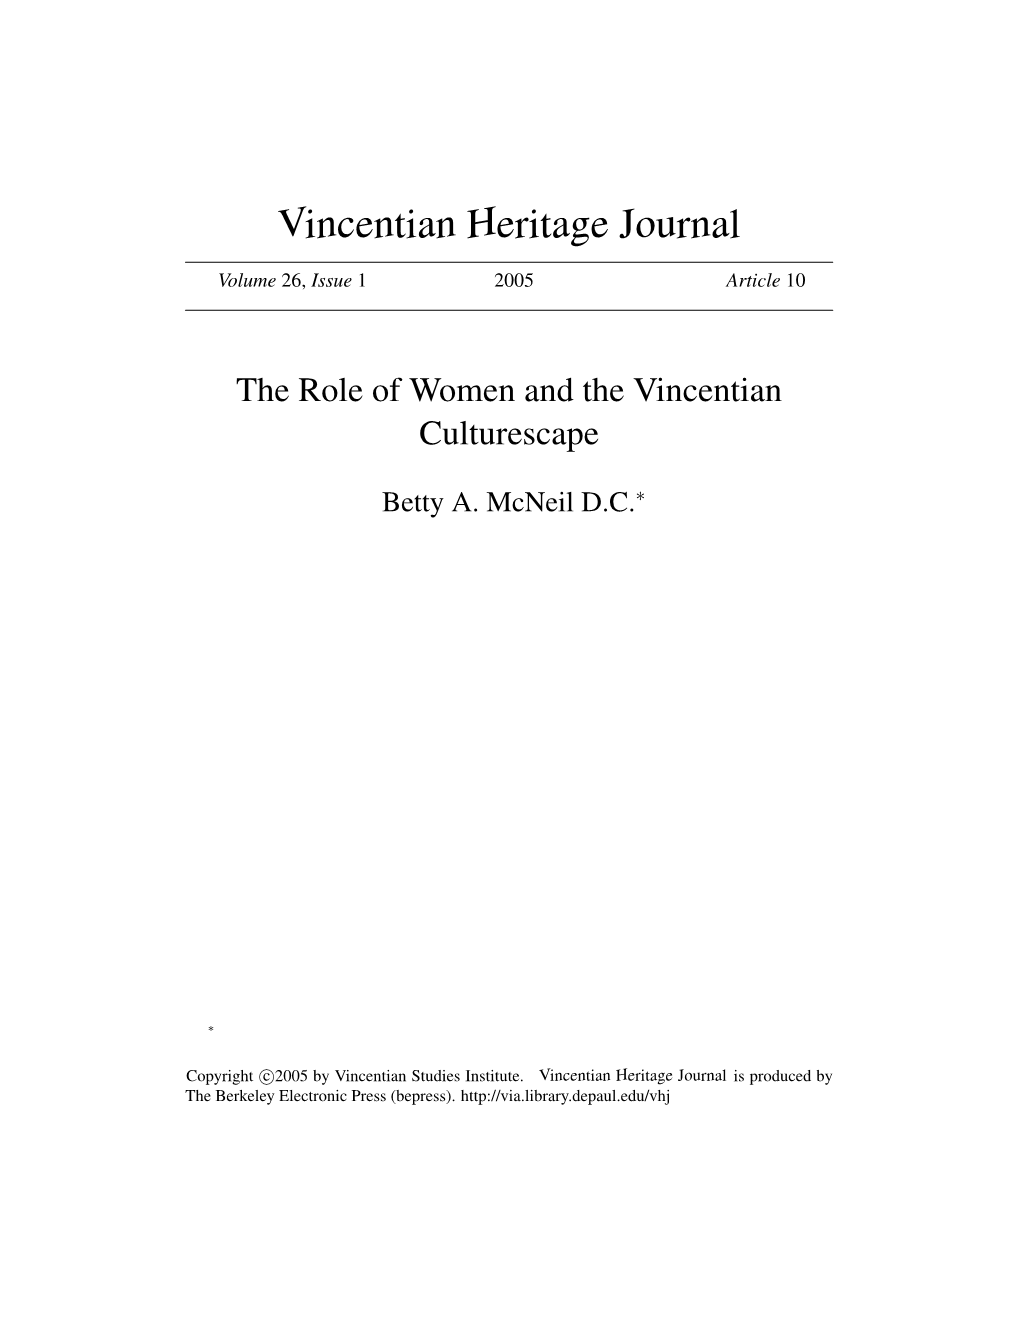 “The Role of Women and the Vincentian